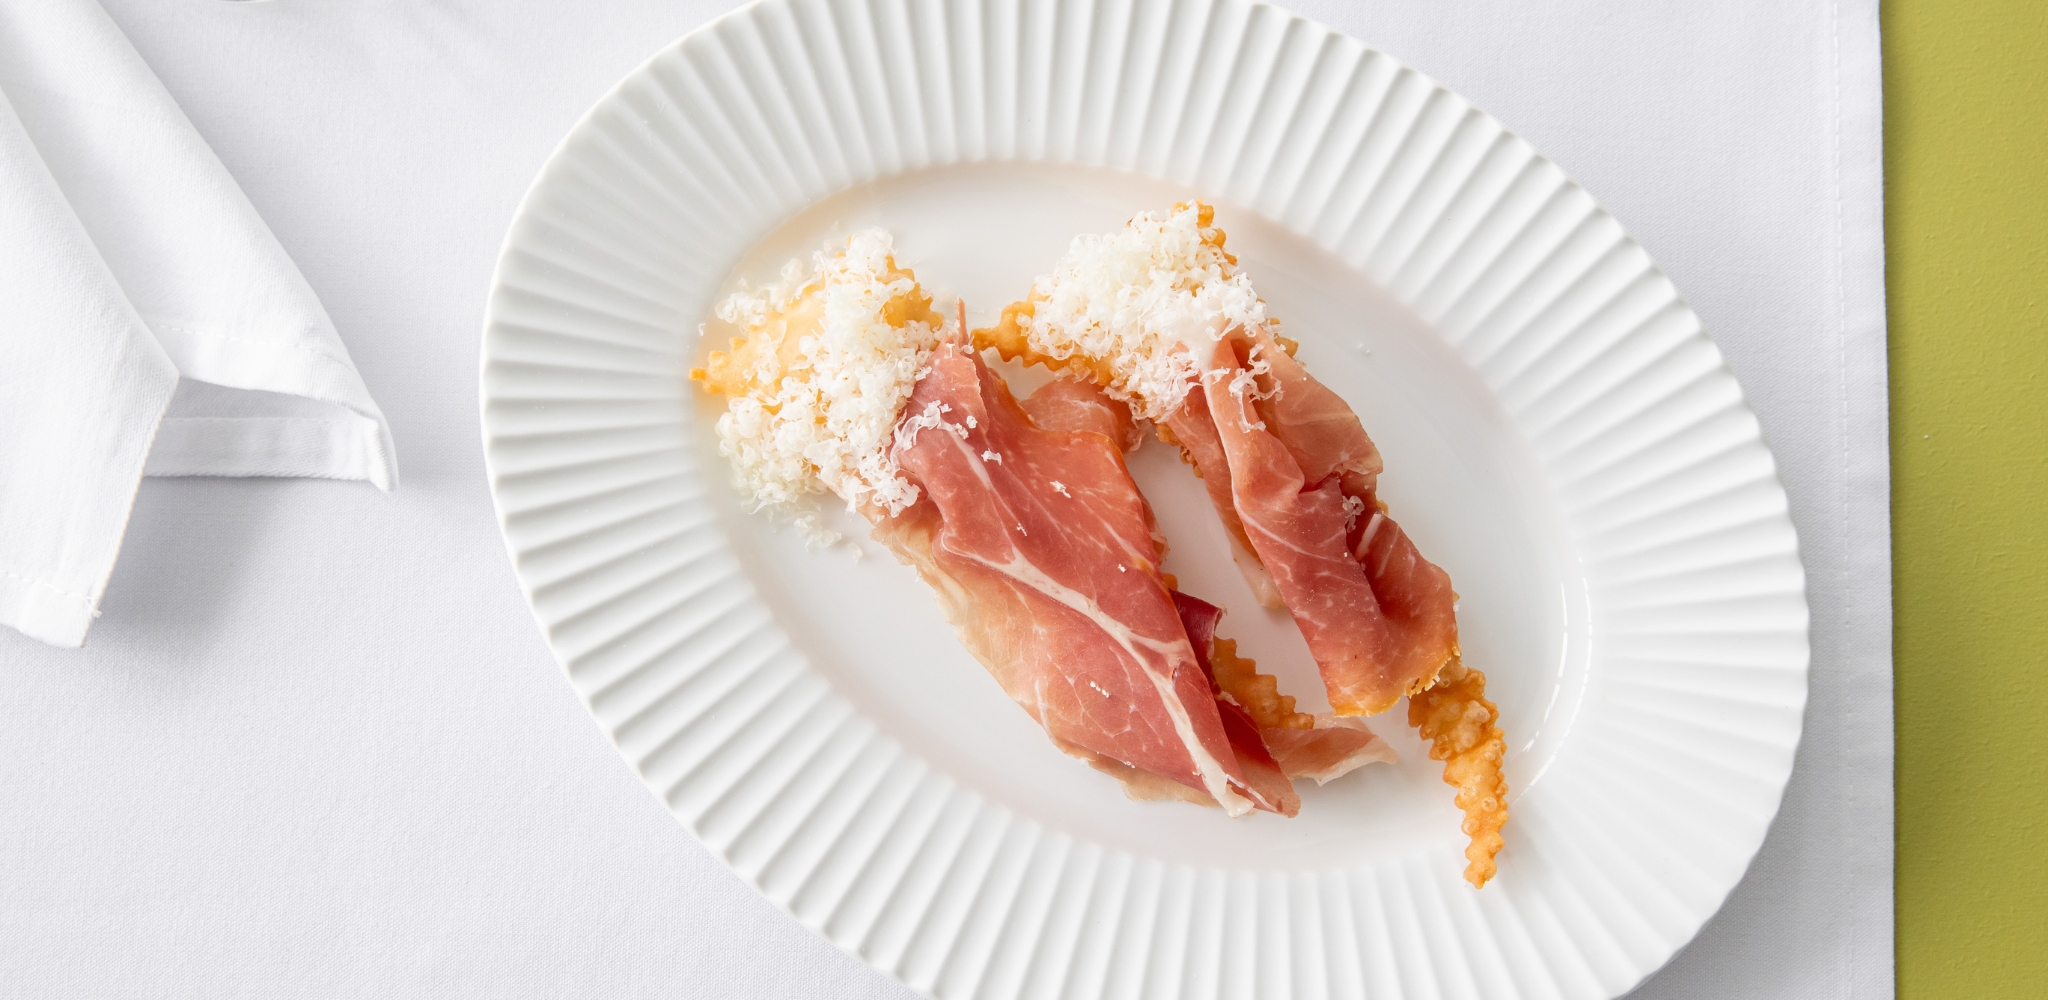 Image of Bistro George's gnocco fritto and San Daniele prosciutto served on a white plate with white napkin.